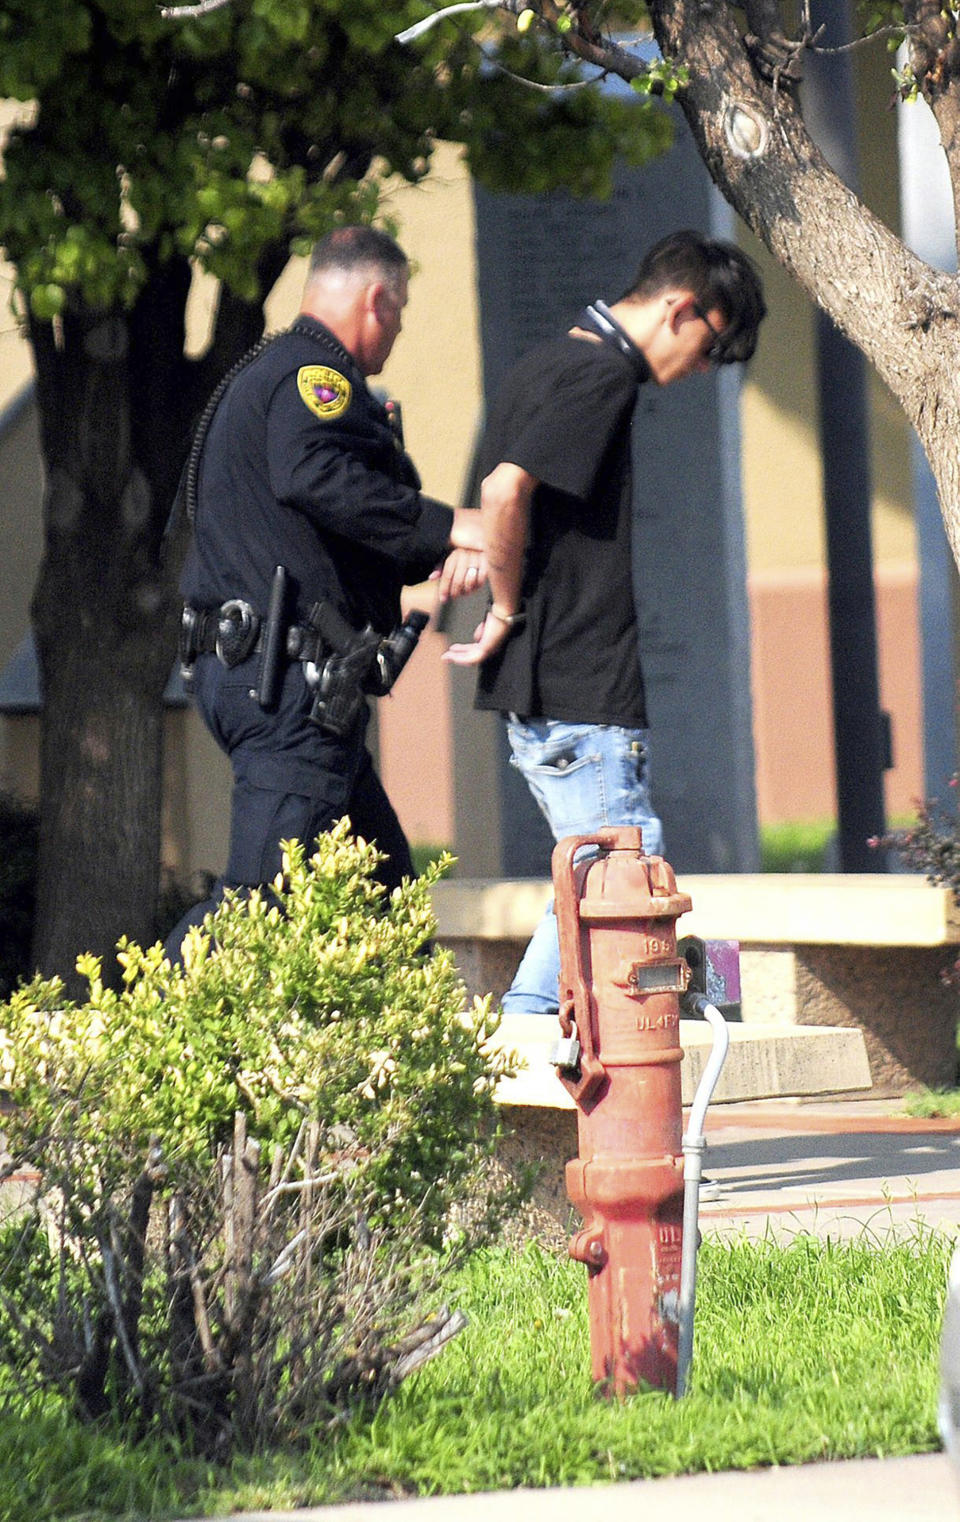 FILE - In this Monday, Aug. 28, 2017 file photo, police take a man, later identified as Nathaneil Ray Jouett, then 17, into custody after a shooting at a public library in the eastern New Mexico community of Clovis. Authorities say Jouett, then 17, who opened fire at a rural New Mexico library last year will plead guilty. The August, 2017 shooting killed two librarians and injured four others. District Attorney Andrea Reeb said Tuesday, Oct. 2, 2018 that Jouett has agreed to plead guilty to 30 counts listed in an indictment filed against him, including two counts of first-degree murder. (Tony Bullocks/Eastern New Mexico News via AP, File)